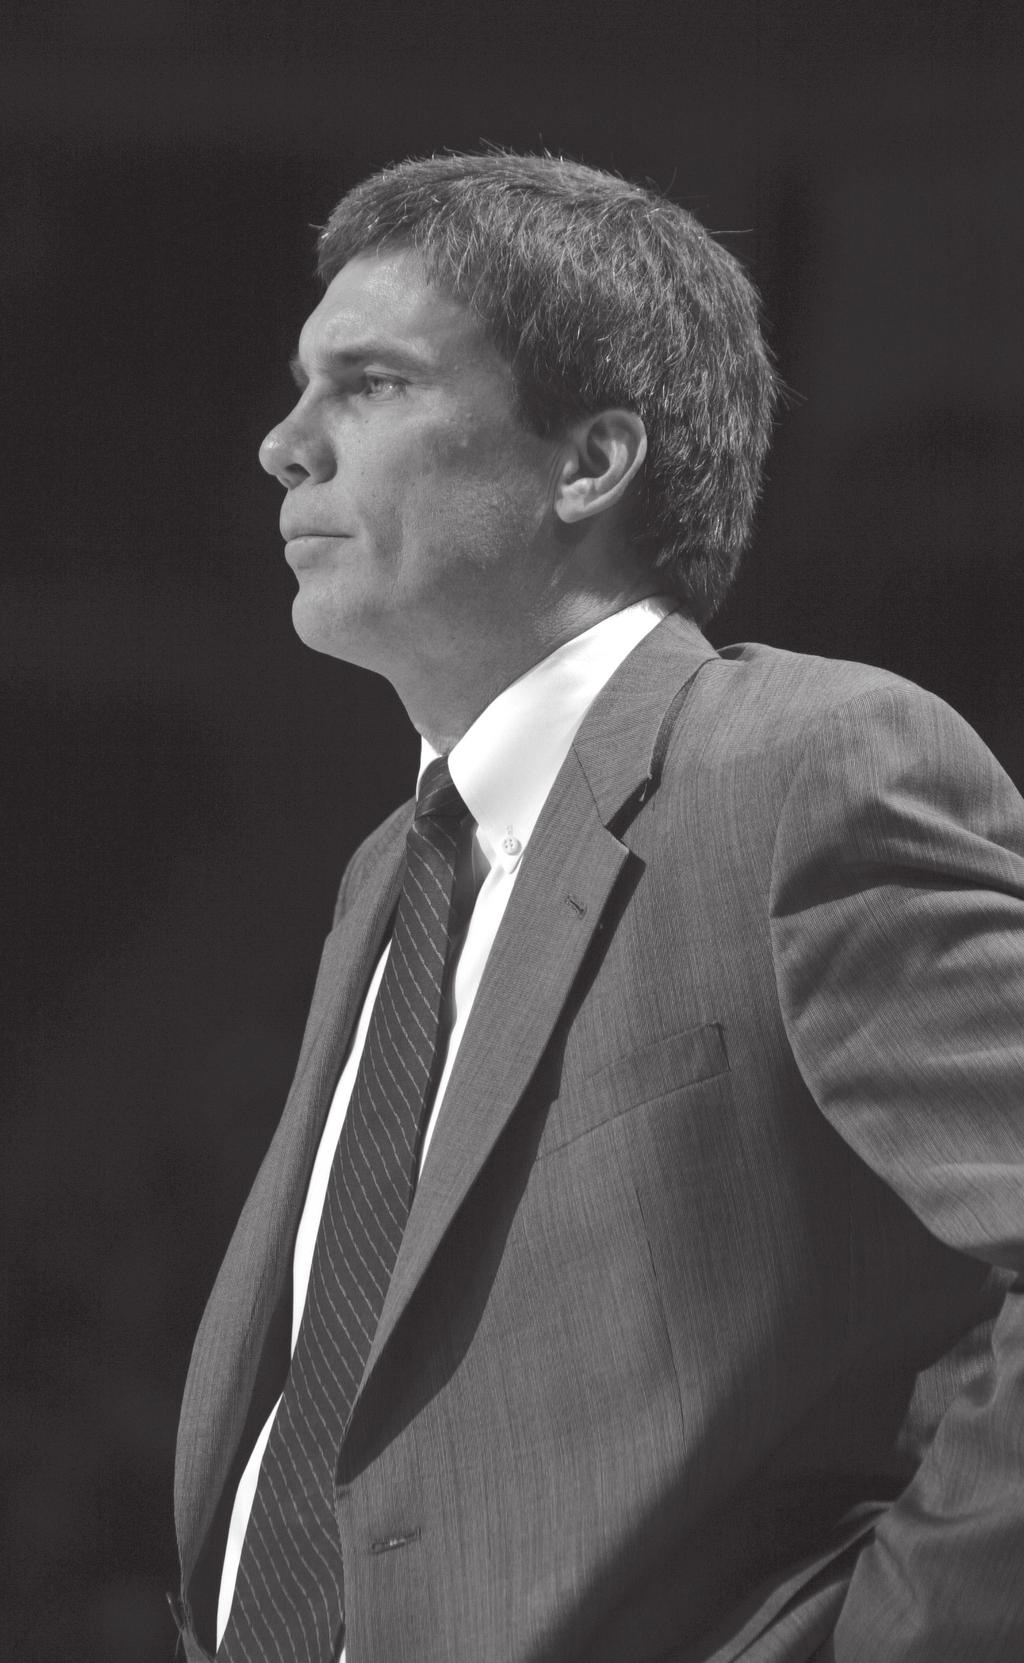 PREVIOUS COACHING EXPERIENCE Started his college career at Duke in 1982-83 as an assistant before serving as an assistant at (1983-85) and East Carolina (1985-86) Five years as a head coach at with a